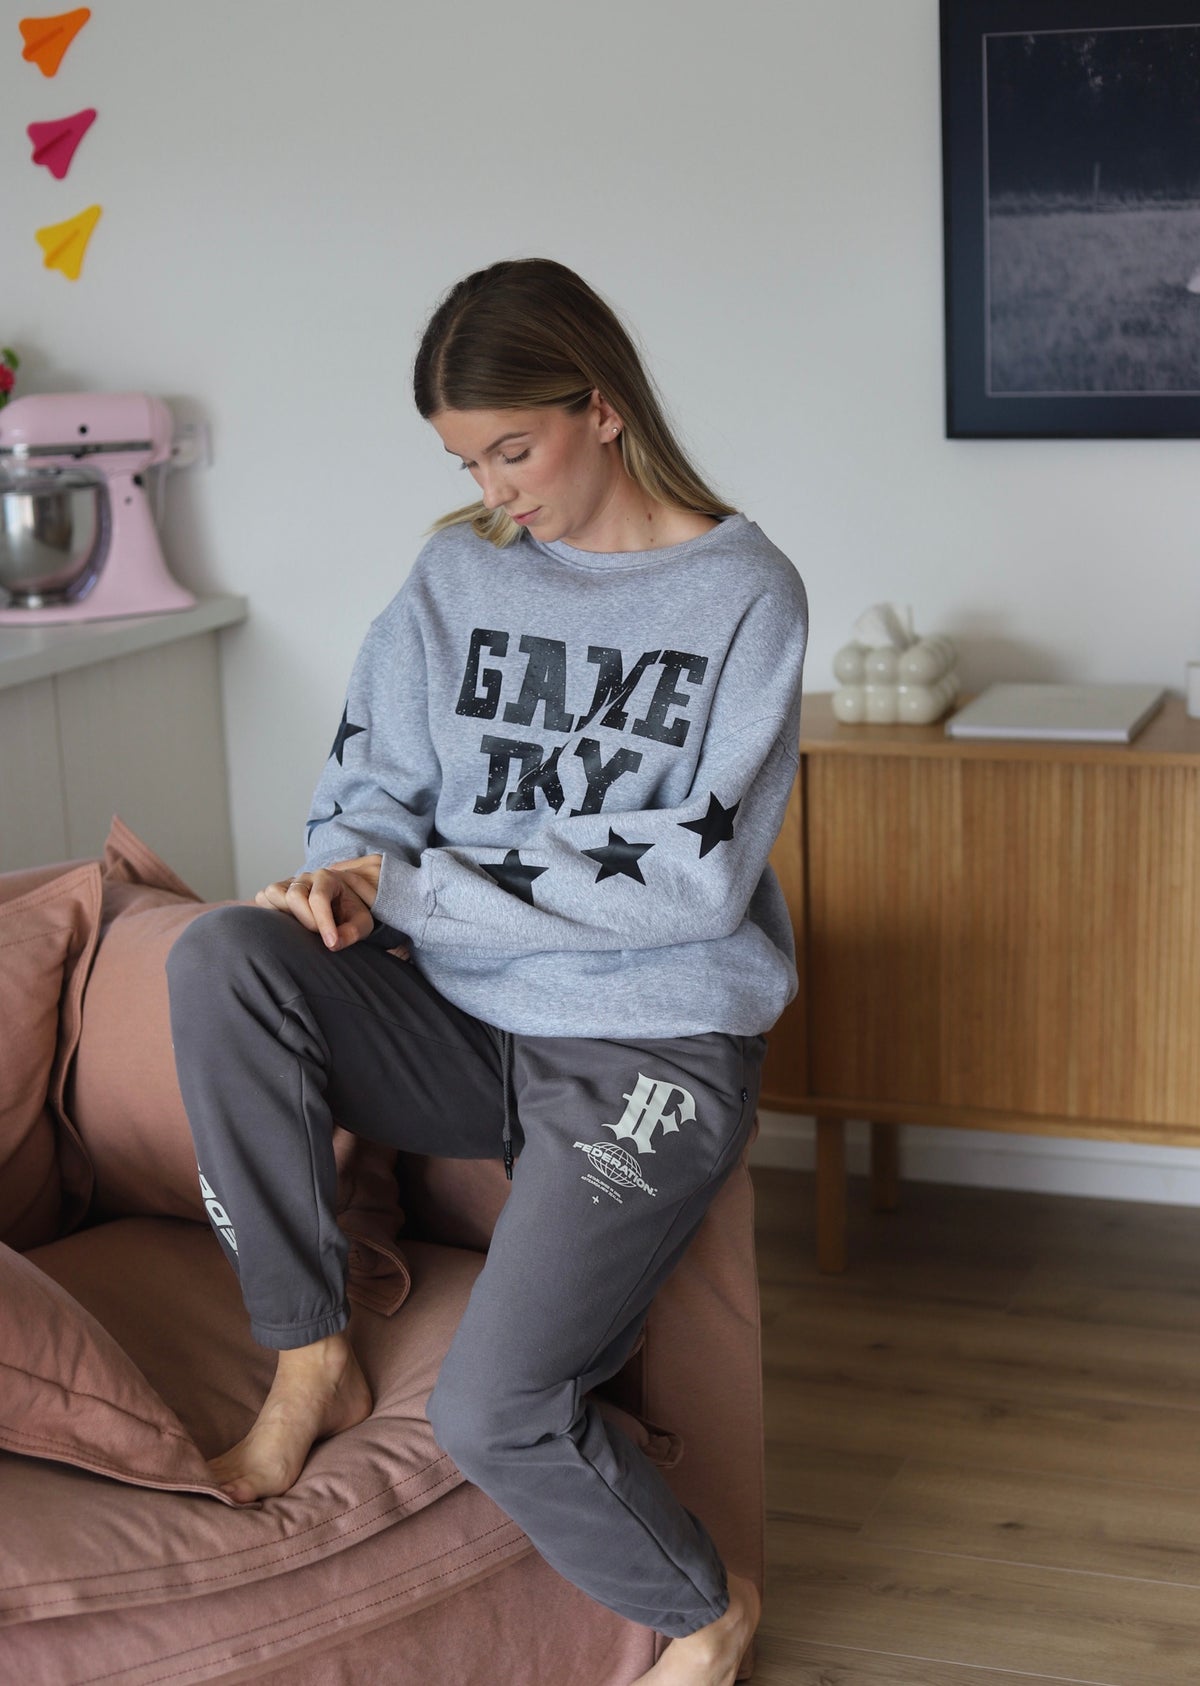 All things comfort yet style in spades. Perfect pieces for those casual outings. Brunch with the girls, supporting from the sidelines or just snuggling up at home.